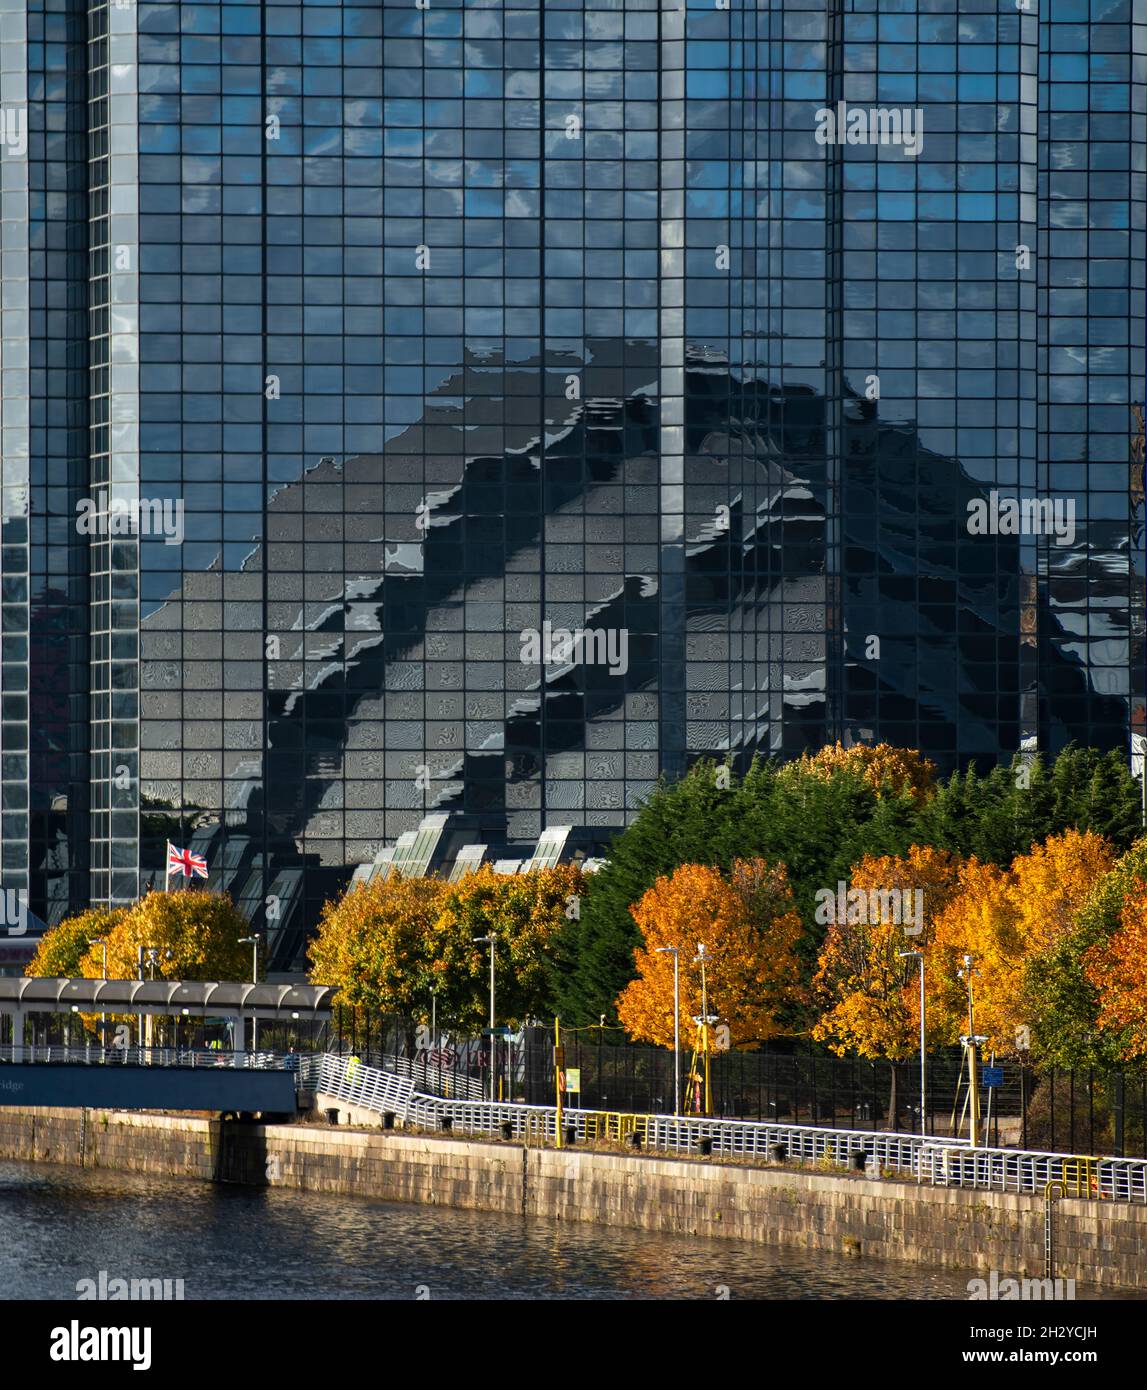 Glasgow, Scotland, UK. 24 October 2021 PICTURED: Glasgow Crown Plaza hotel reflecting the image of the SEC Armadilo building in its exterior mirrored windows. Views of the COP26 site showing the river Clyde and dockside, with the Scottish Event Campus buildings (OVO Hydro Arena, SEC Armadillo and SECC buildings) along with the Crown Plaza Hotel and the ring of steel security fence surrounding the area. Days until Heads of State, along with thousands of delegates and media and protestors are expected to land in Glasgow very shortly for the beginning of the Climate Change Summit starting on 31 O Stock Photo